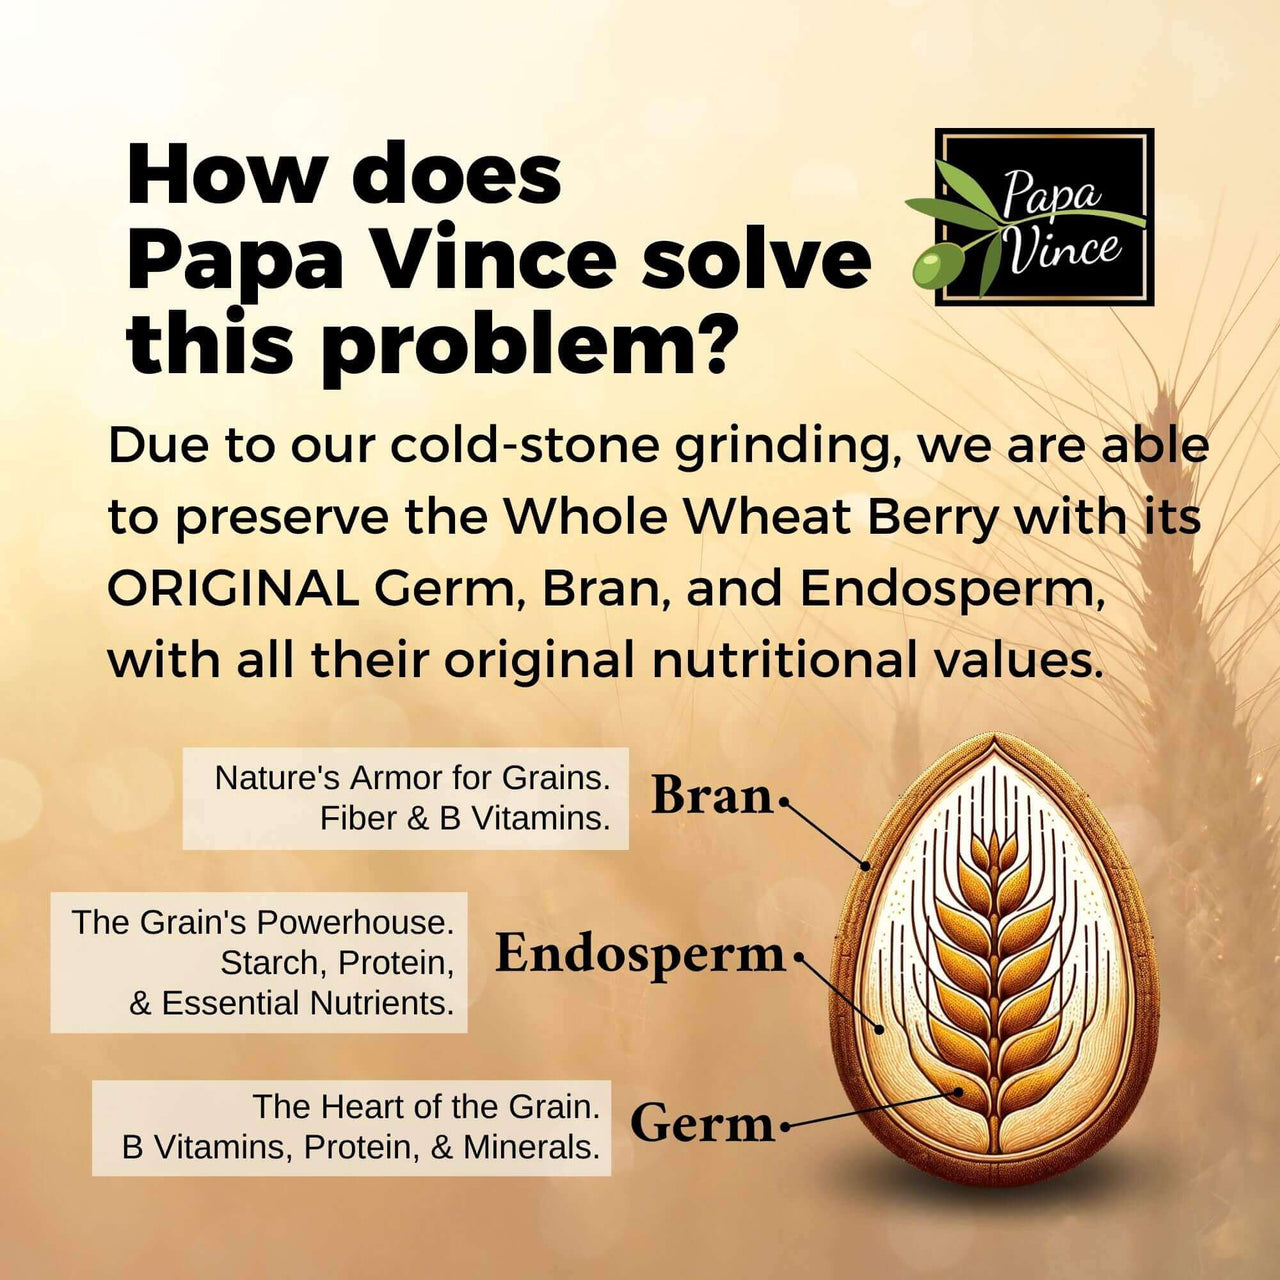 How does Papa Vince preserve nutrients? Stone Grinding Pasta. Due to our cold-stone grinding, we are able to preserve the Whole Wheat Berry with its ORIGINAL Germ, Bran, and Endosperm, with all their original nutritional values.